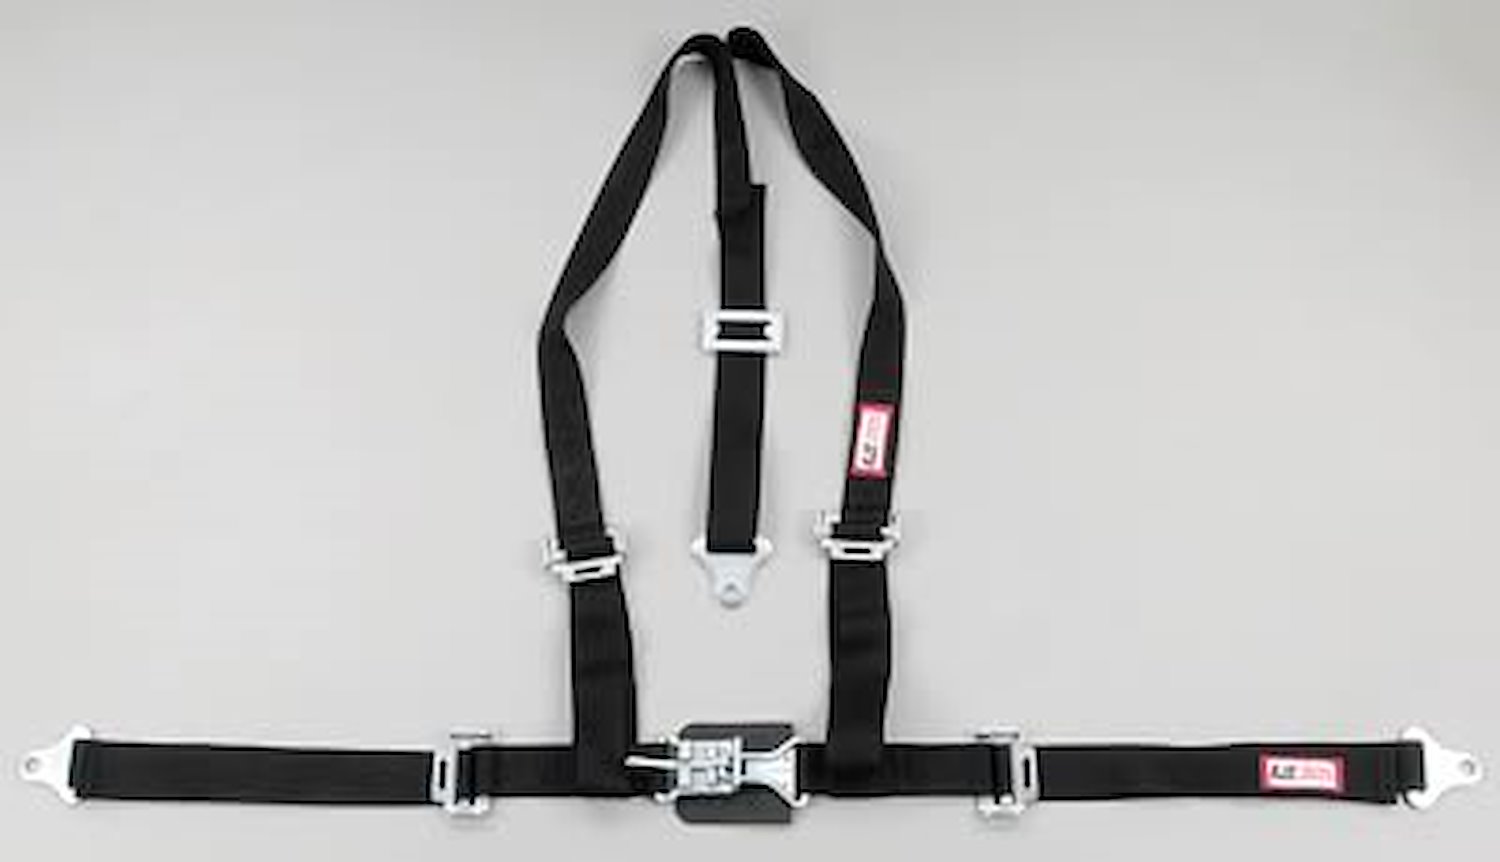 NON-SFI L&L HARNESS 2 PULL UP Lap Belt SEWN IN 2 S.H. V ROLL BAR Mount ALL BOLT ENDS RED